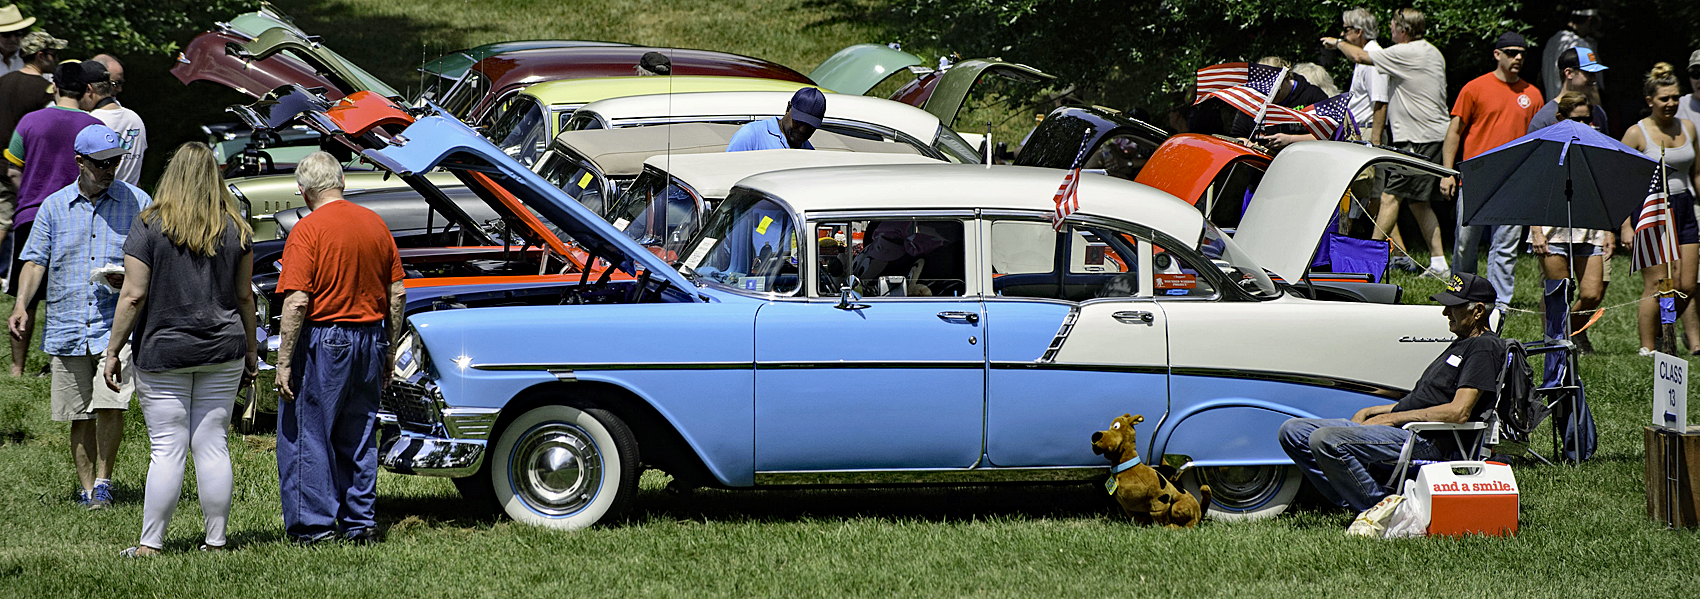 A classic 1956 Chevy at the Sully Car Show